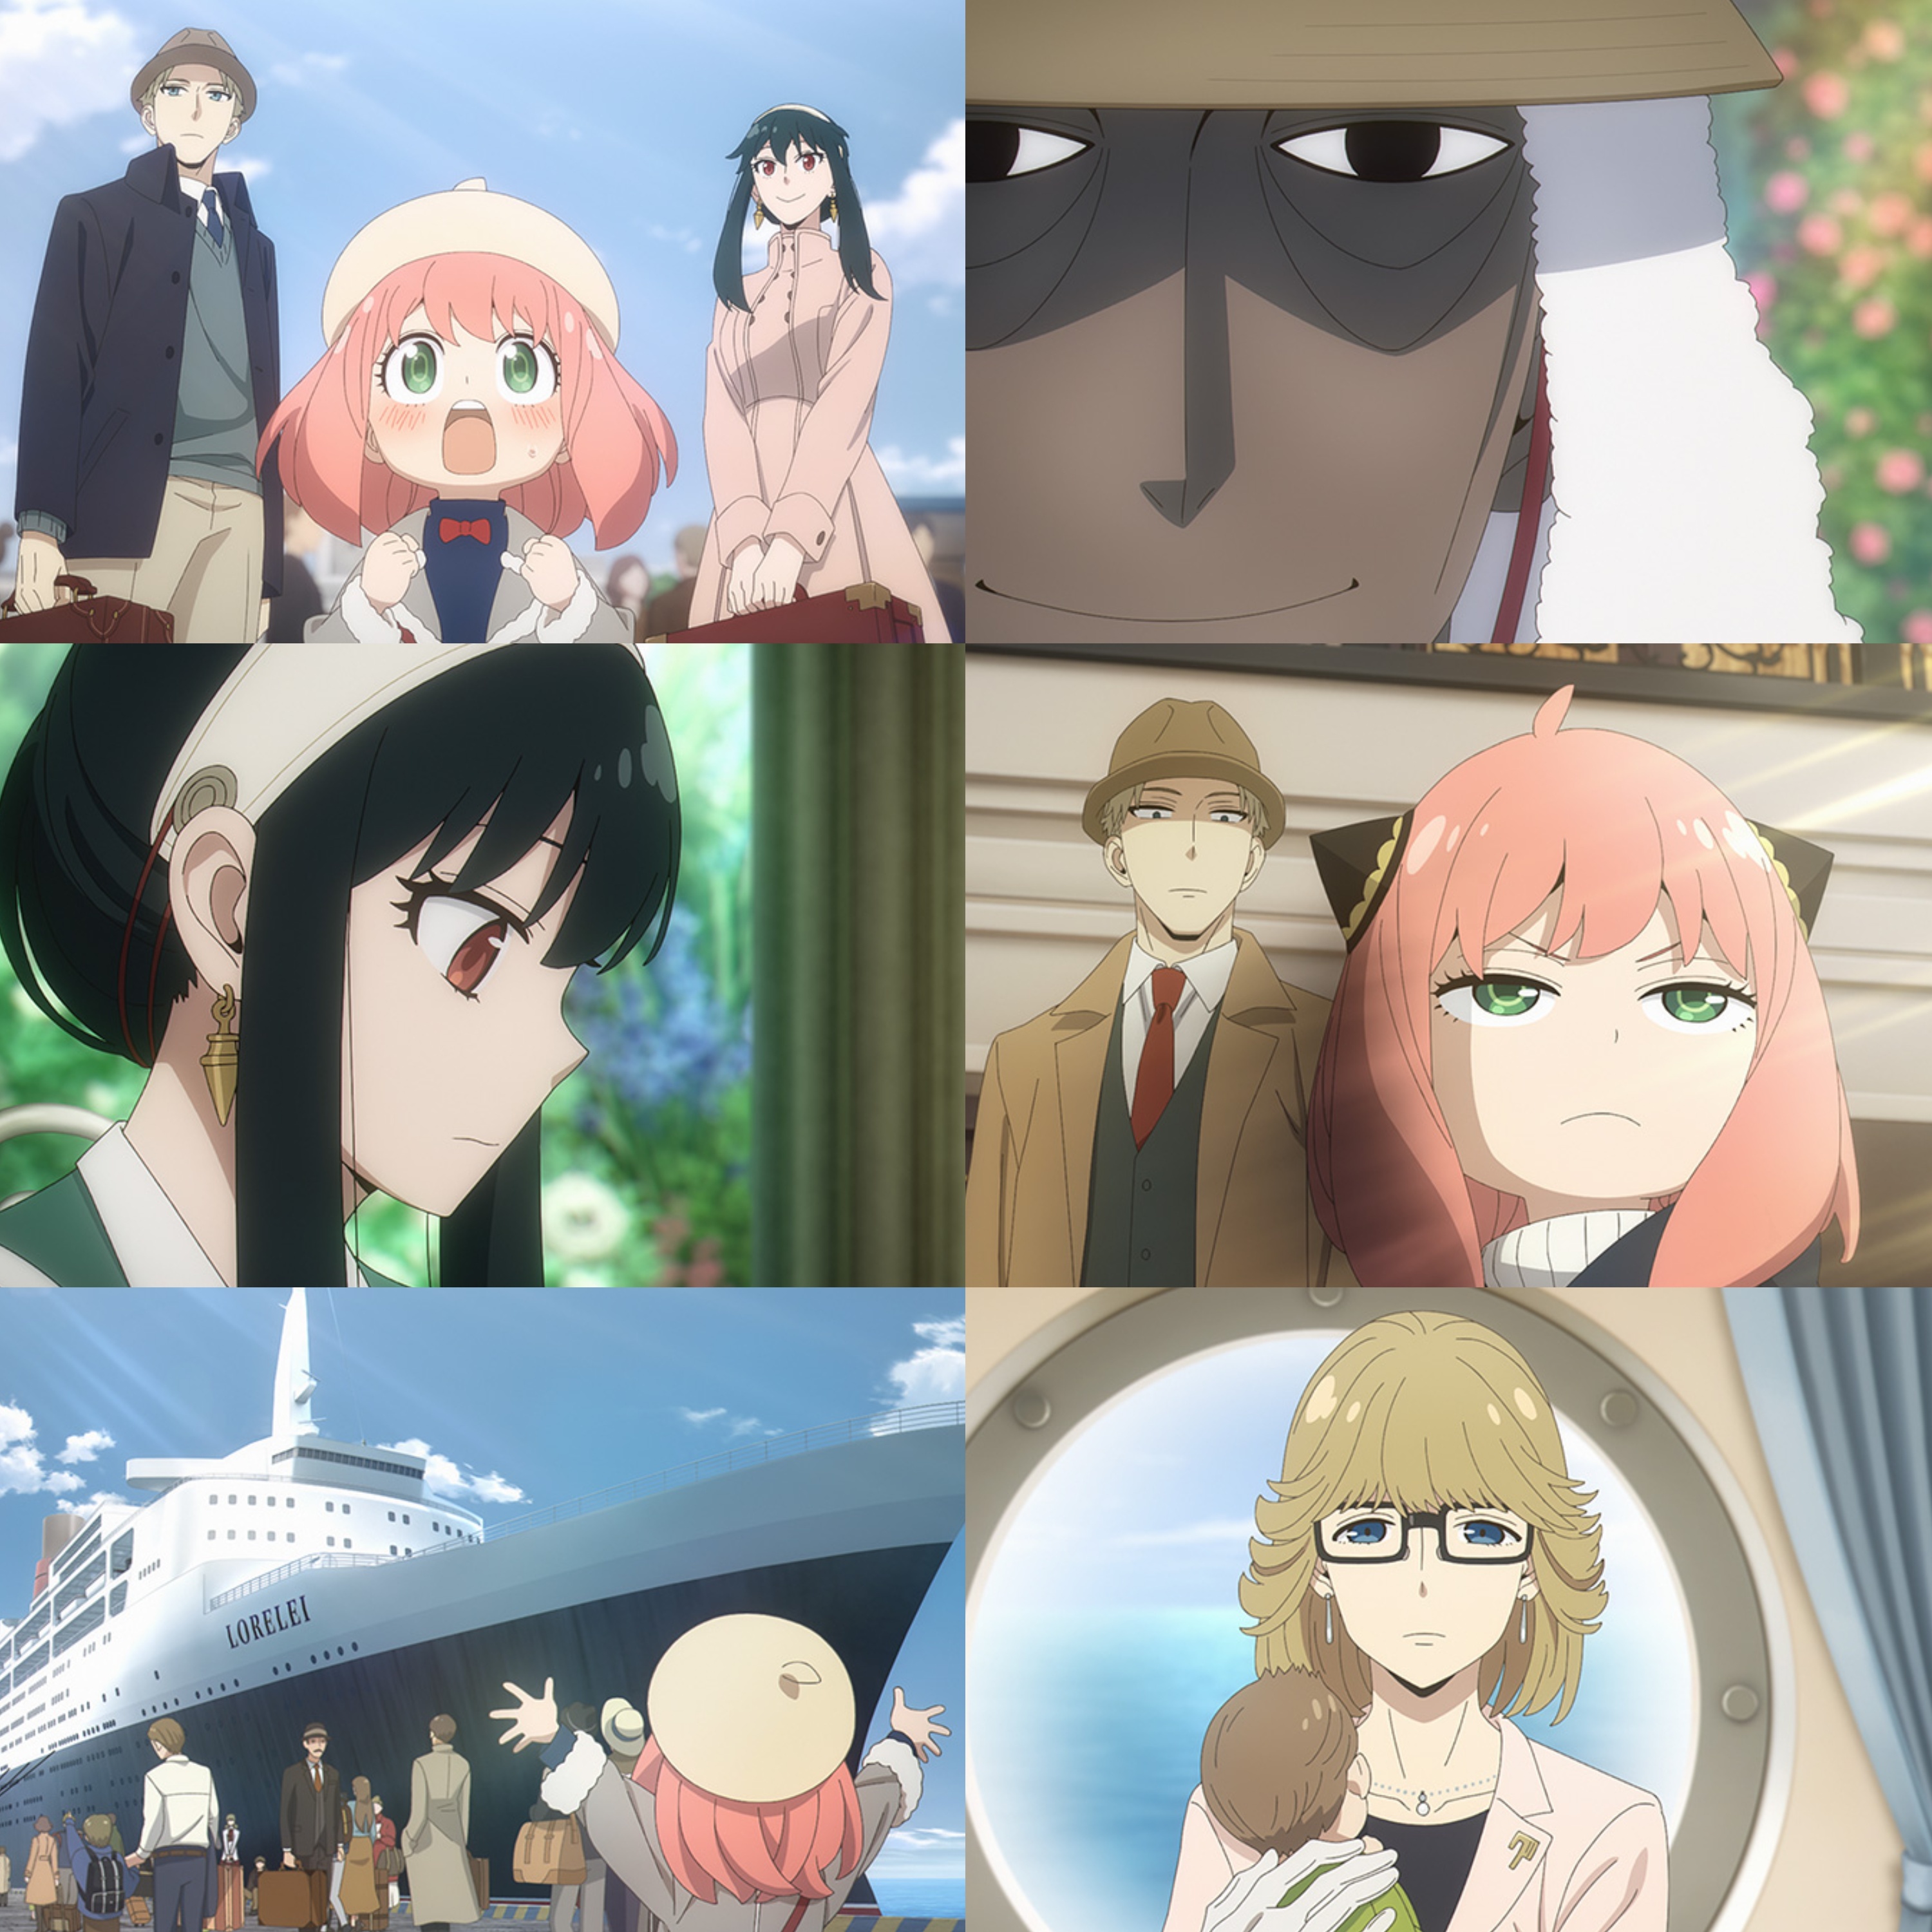 Anya's Cruise Adventure Sets Sail in Spy x Family Season 2 Episode 5  Preview - Anime Corner